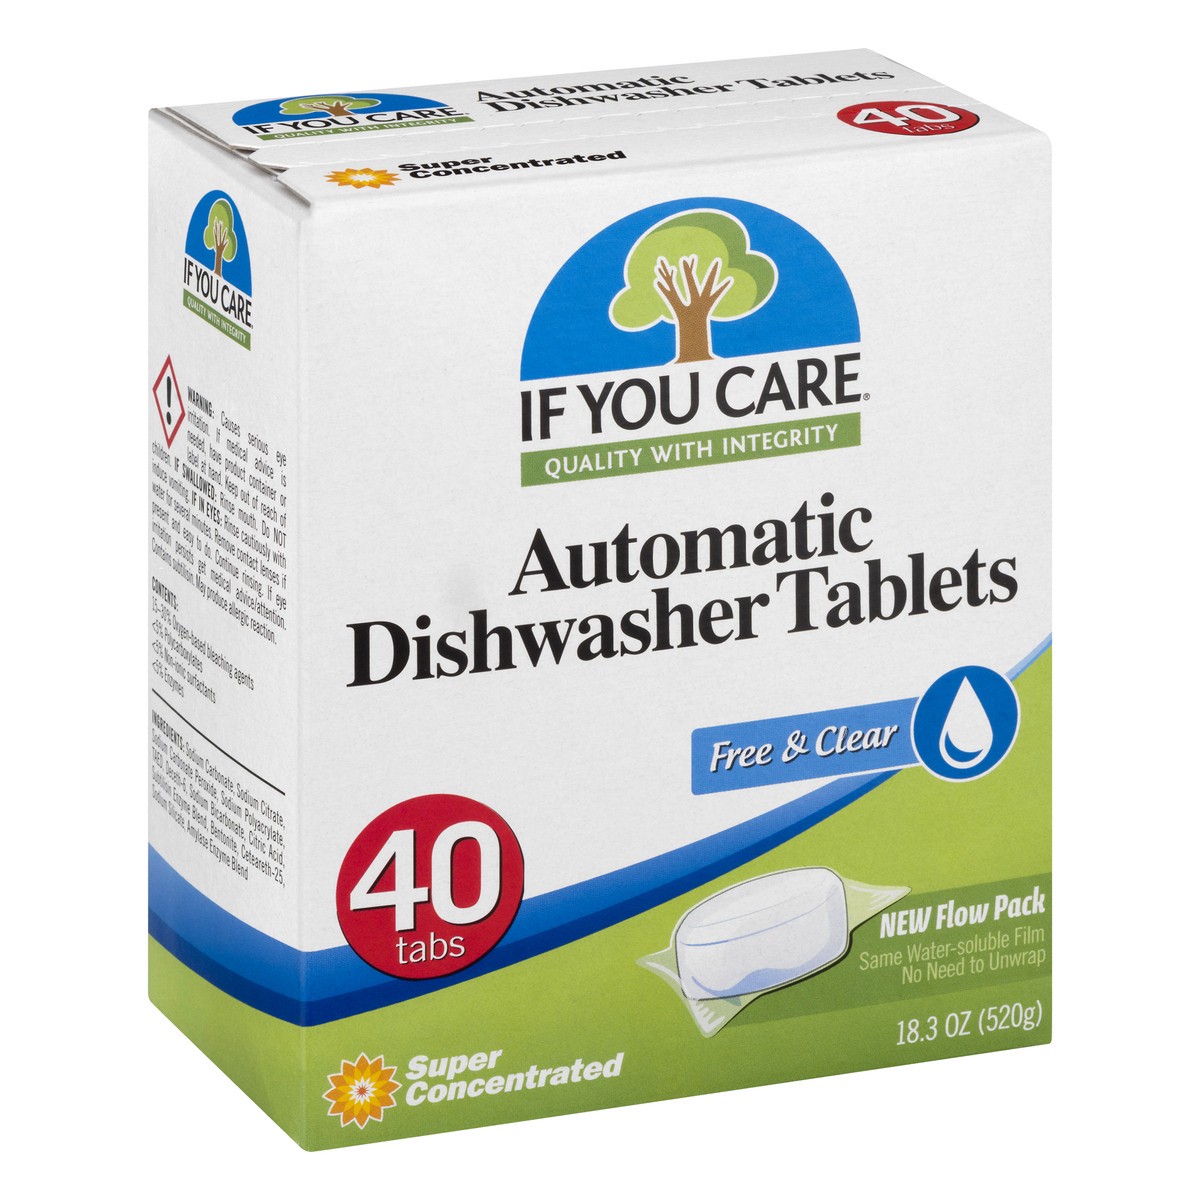 slide 2 of 9, If You Care Source Atlantique, Inc If You Care Dishwasher Tablets, Automatic, Super Concentrated, Free & Clear 40Ct, 18.3 oz